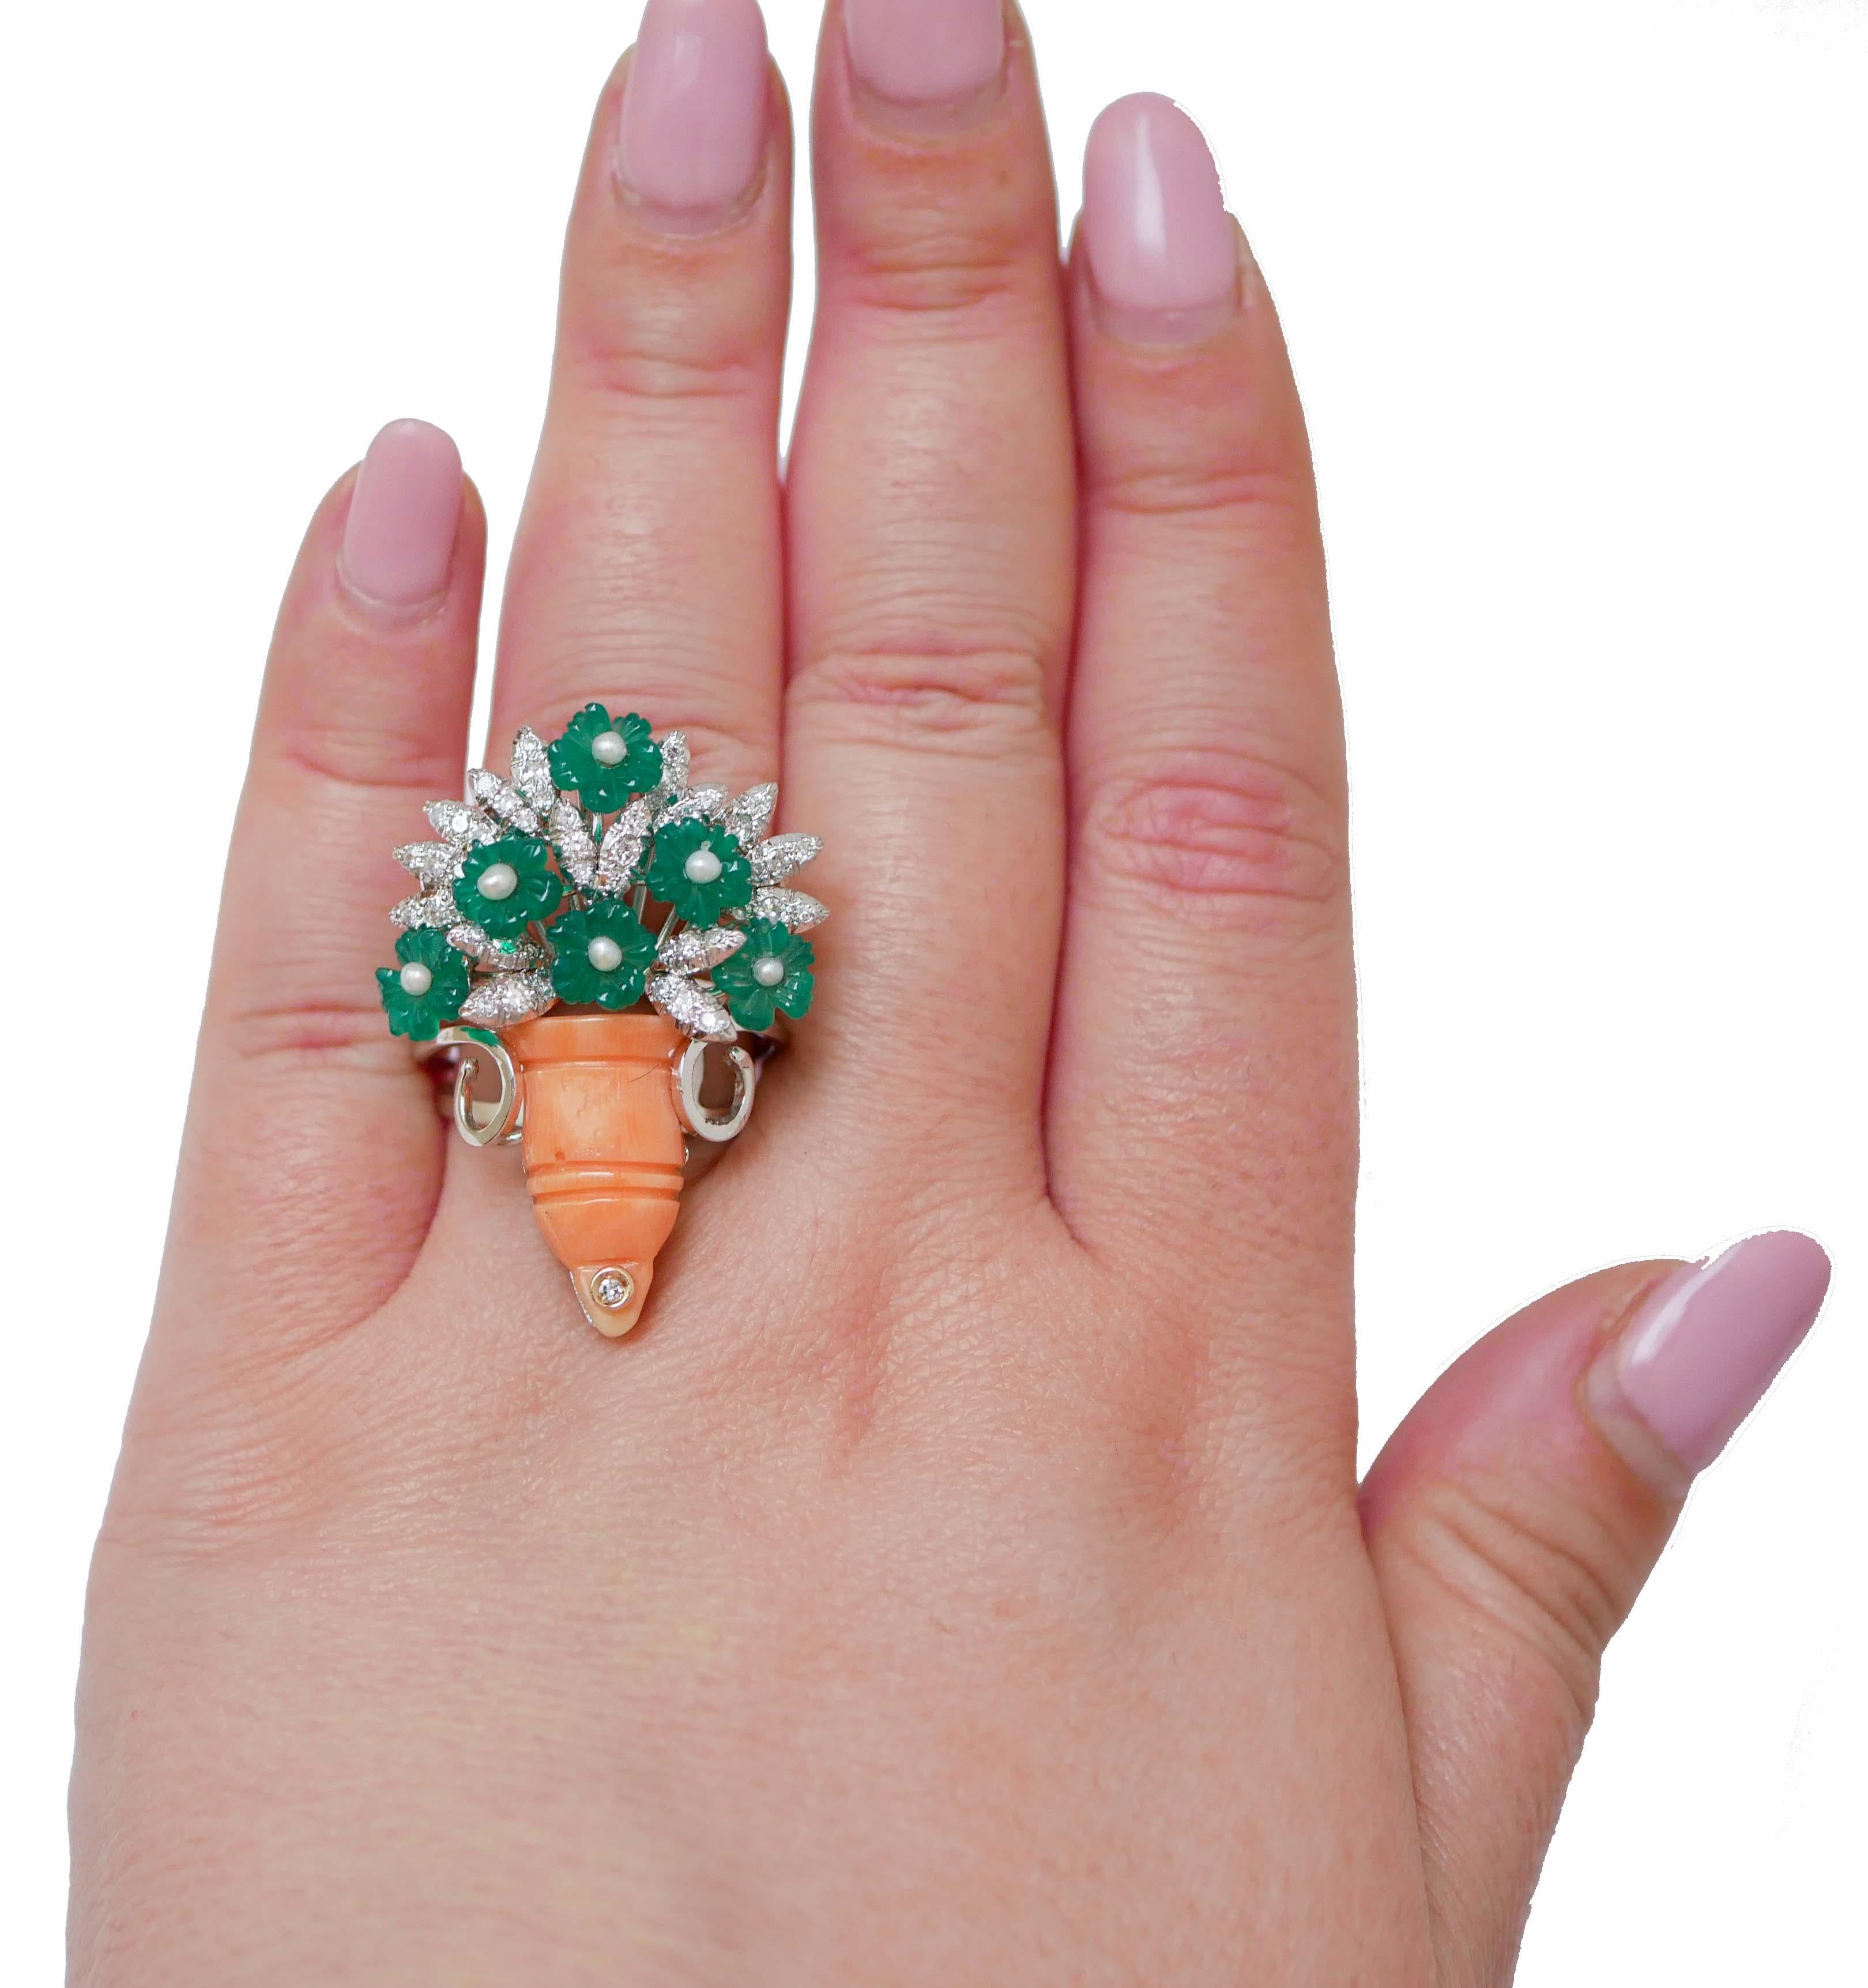 Mixed Cut Coral, Pearls, Diamonds, Green Agate, 14 Karat White Gold Ring. For Sale